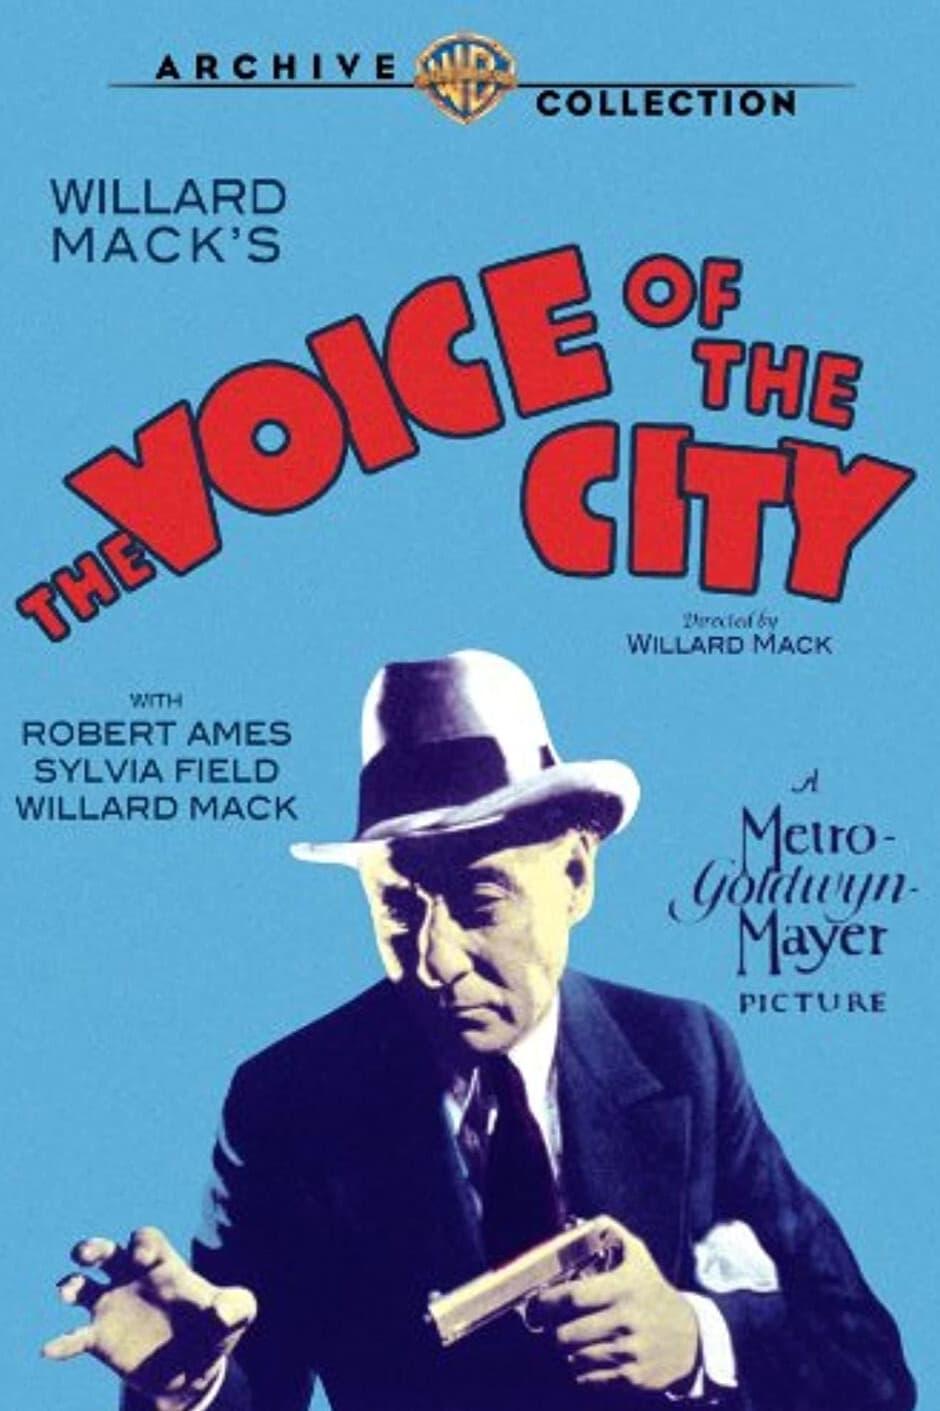 The Voice of the City poster